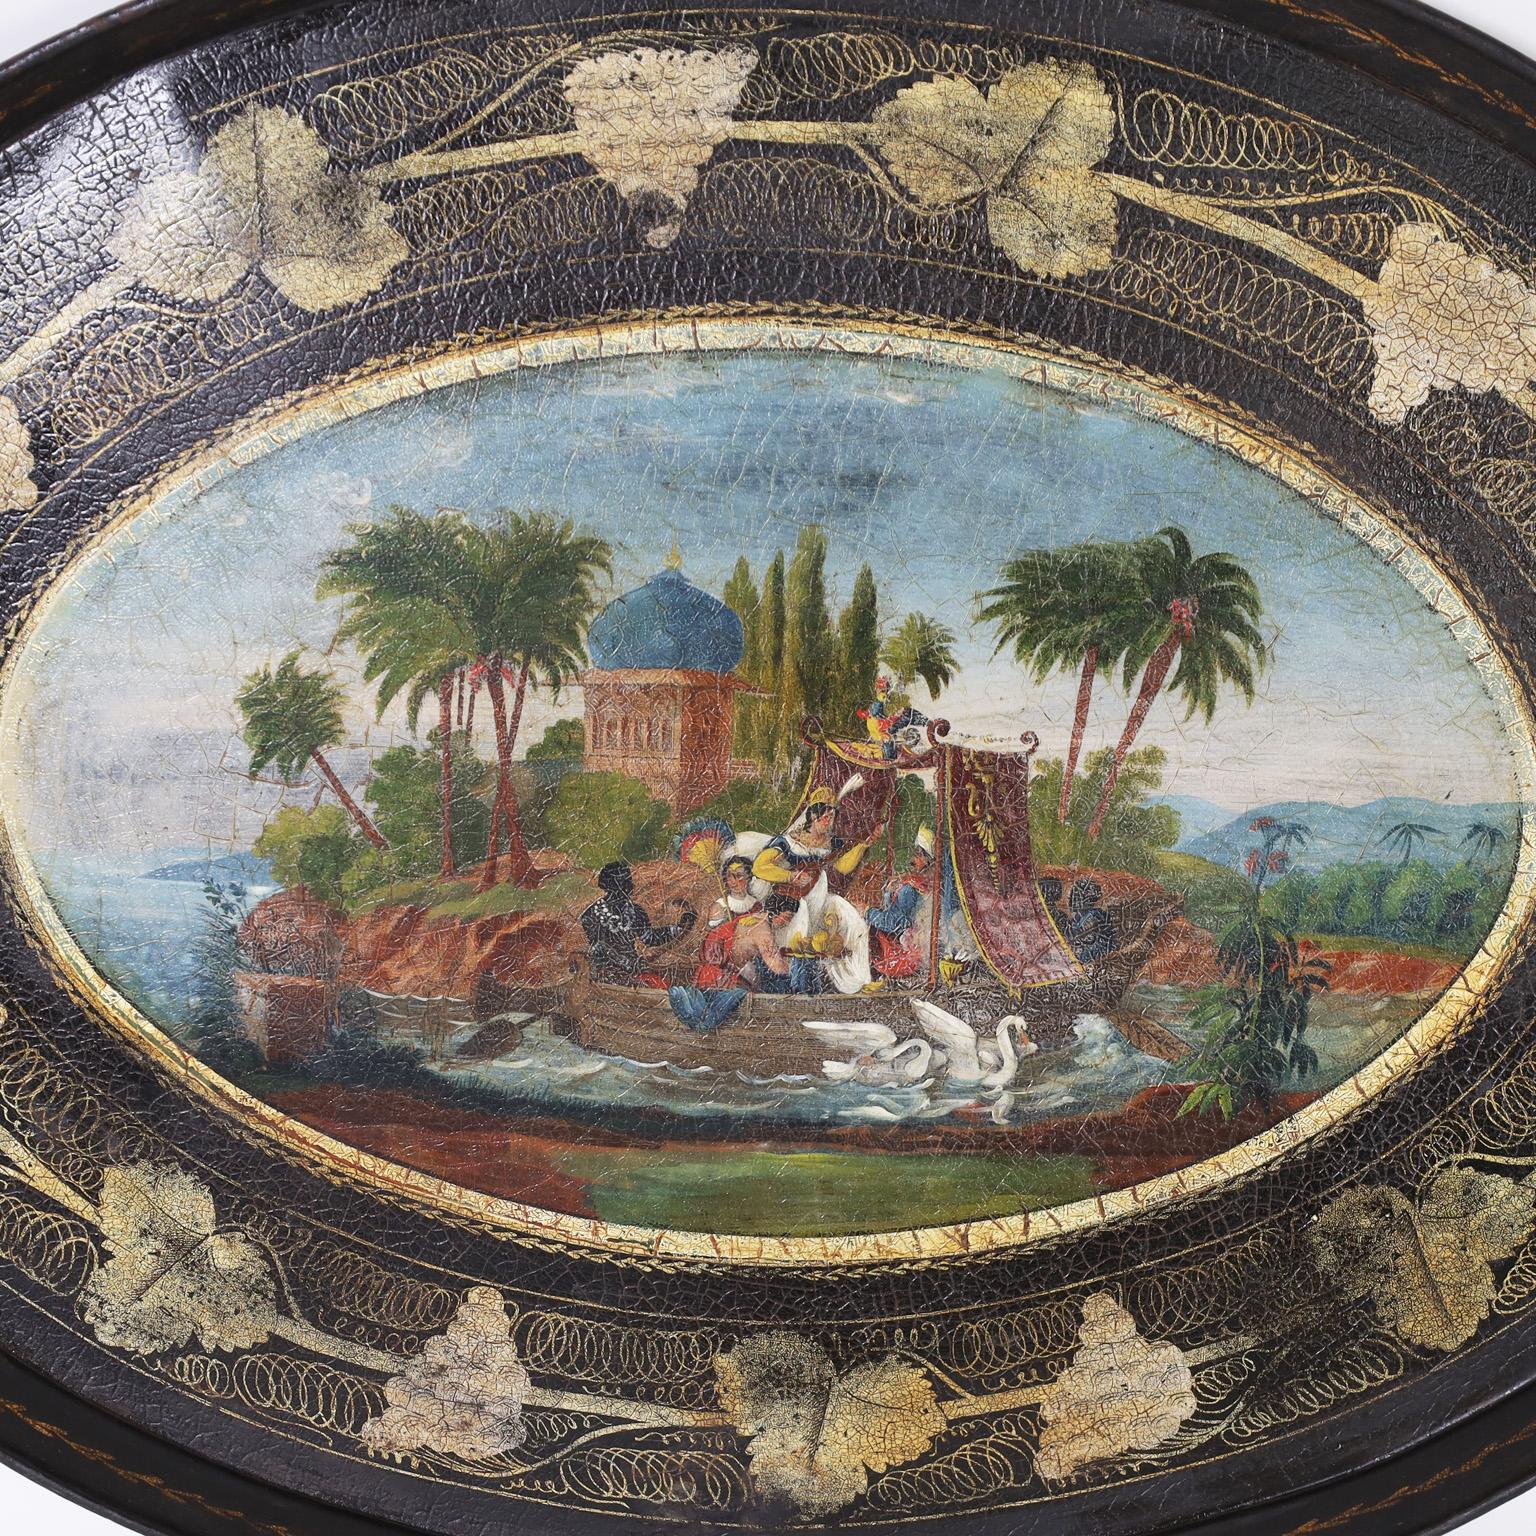 Lofty 19th century English oval tole tray with two cut out handles featuring a colorful orientalist oil painting complete with figures in a boat architecture and tropical setting inside a leaf and vine border. 